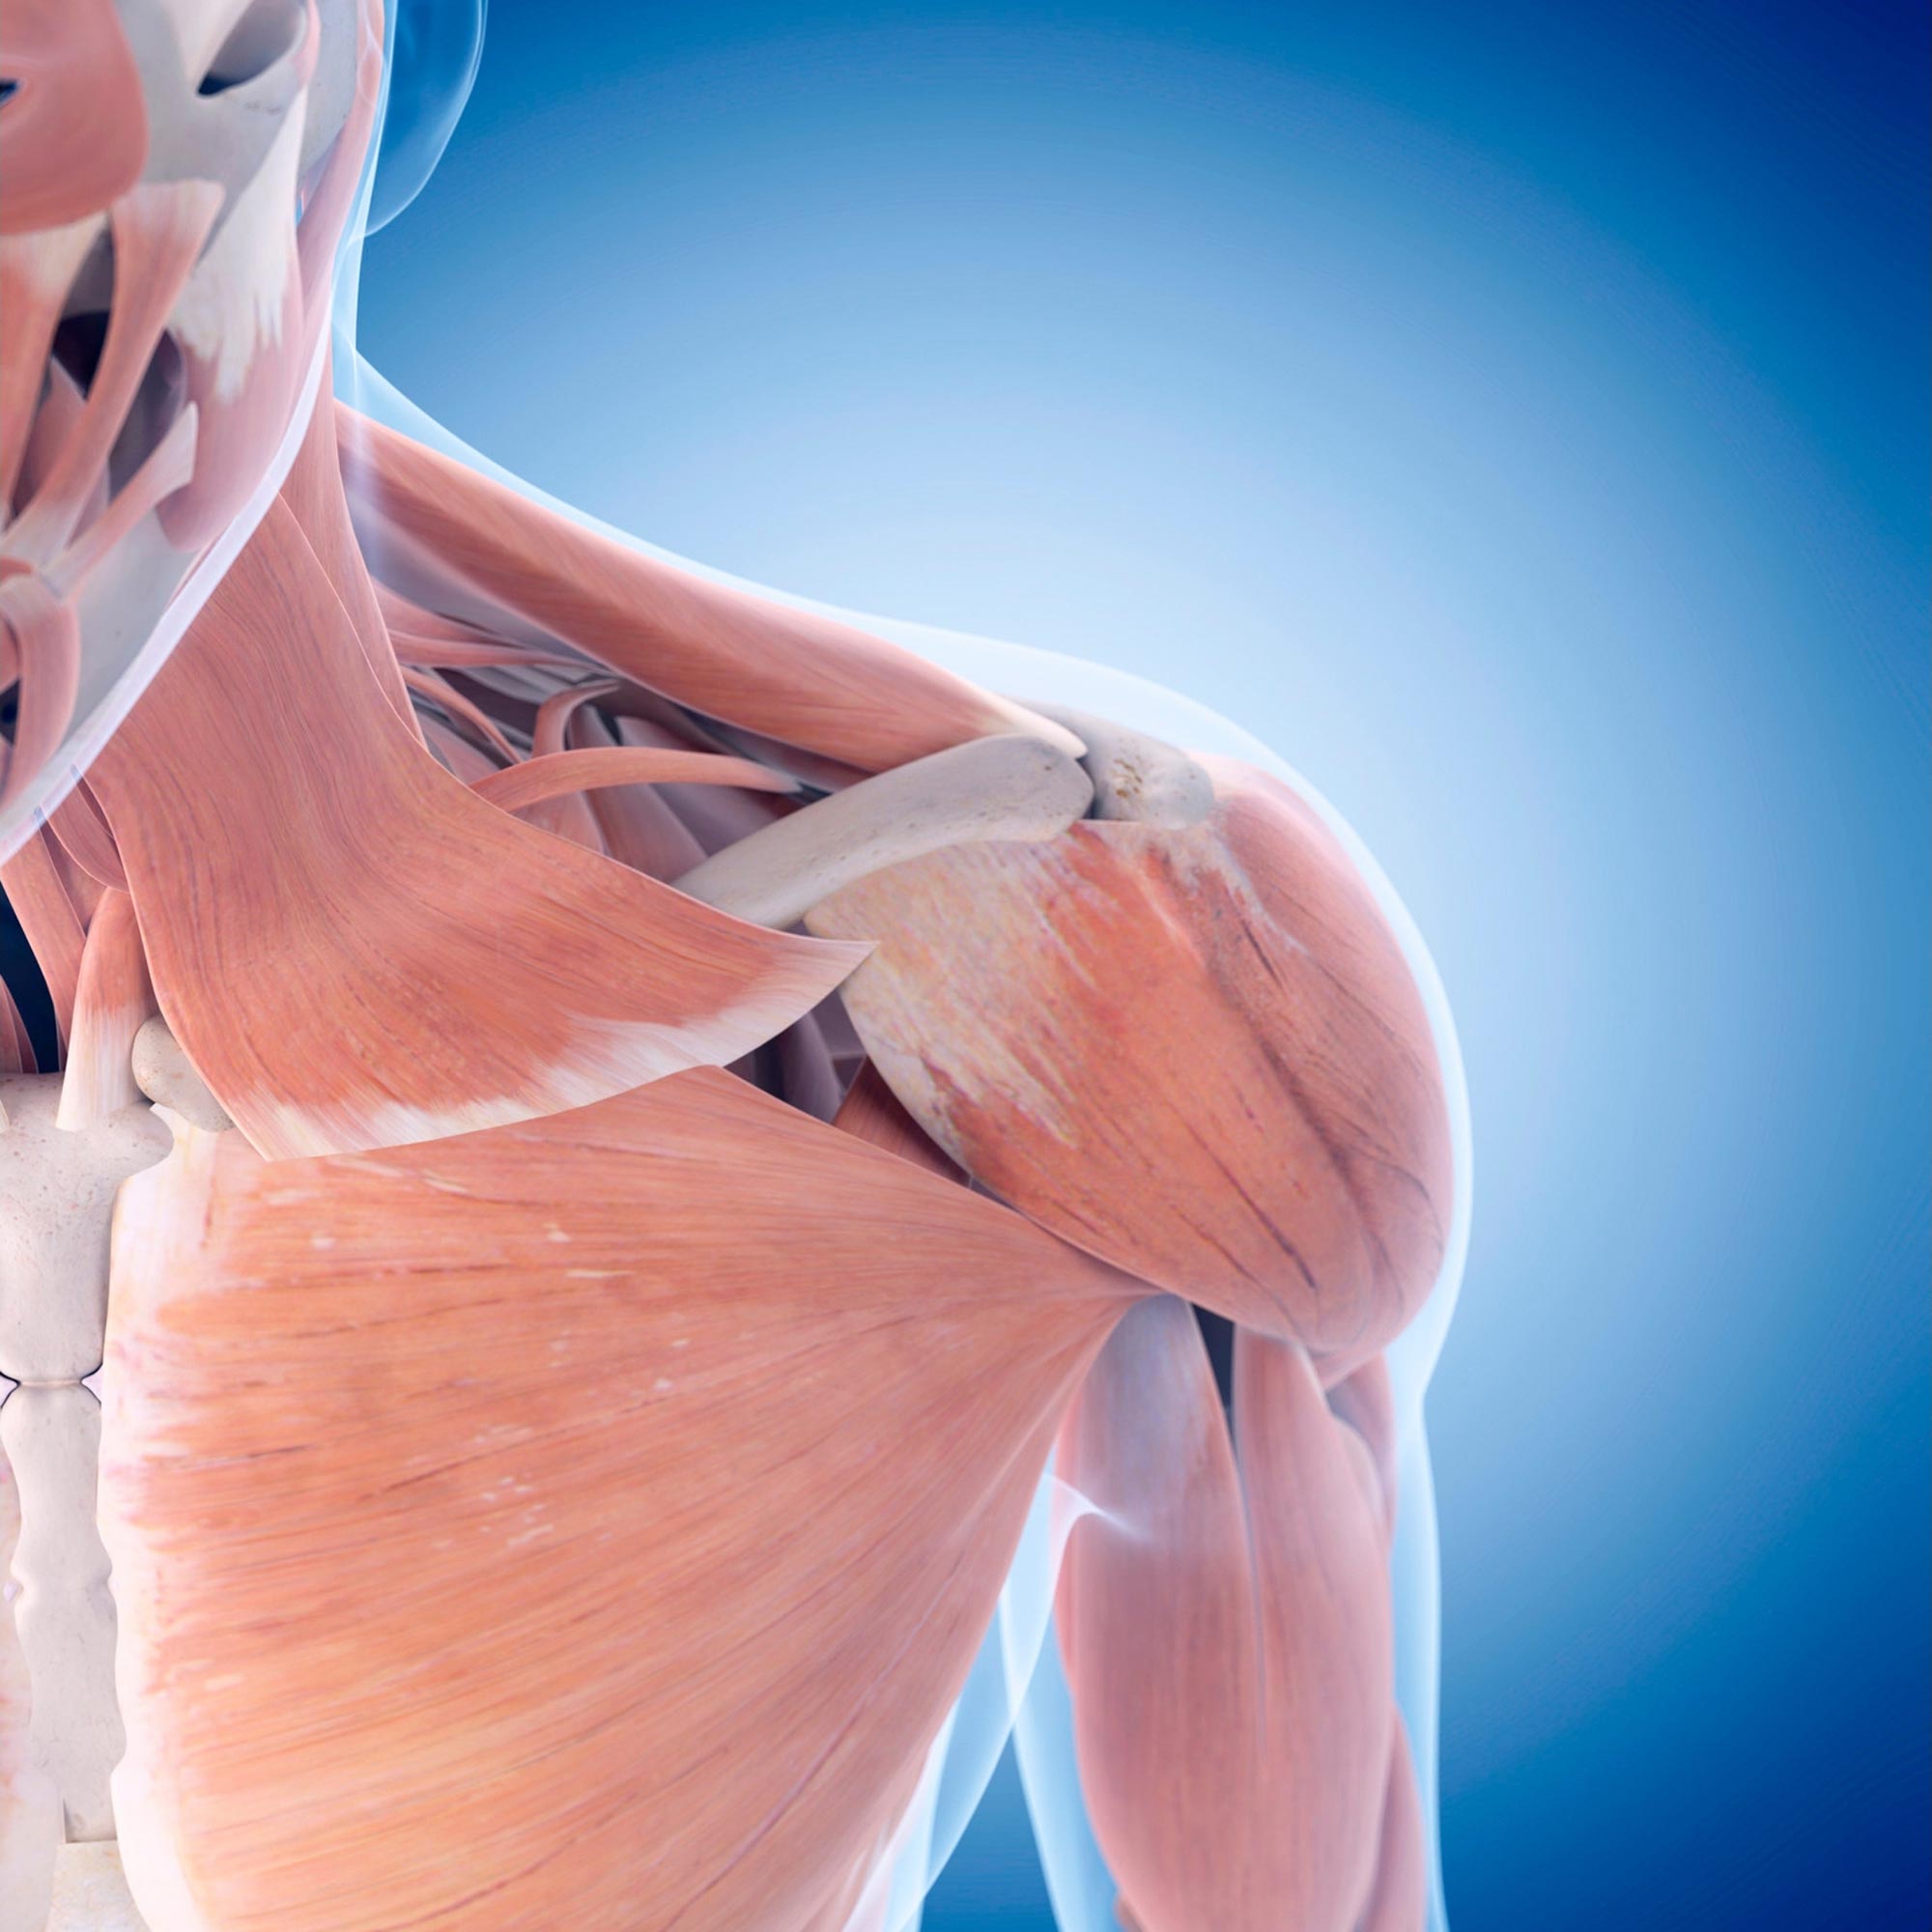 Fixing Shoulder Pain: Harvard Scientists Develop a Method To Restore Damaged Tendons and Muscles - SciTechDaily